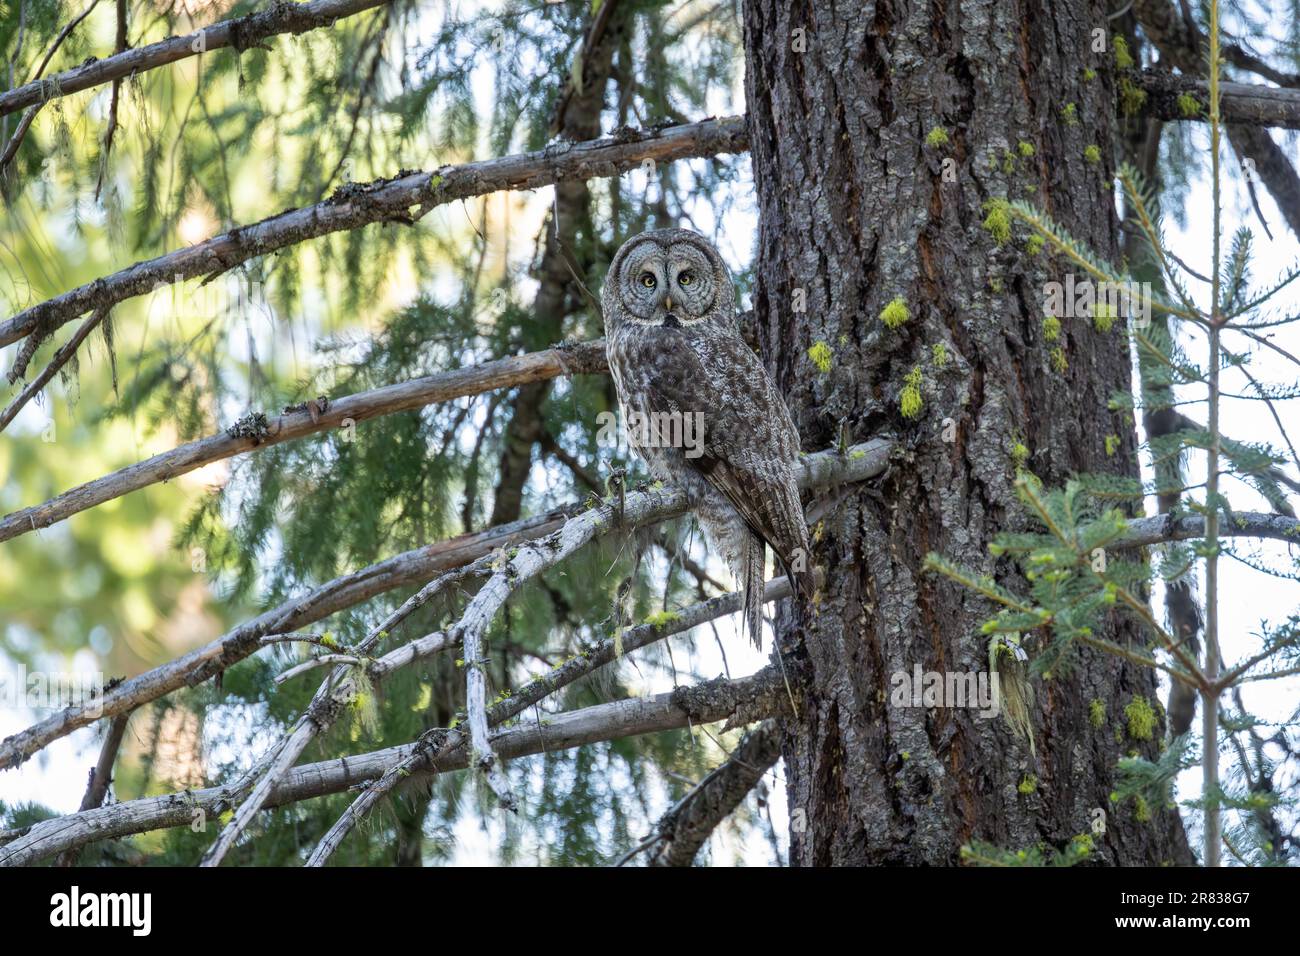 A Great Gray Owl (Strix nebulosa), in its natural forest habitat engaging in direct eye contact with its large, piercing yellow eyes. Stock Photo